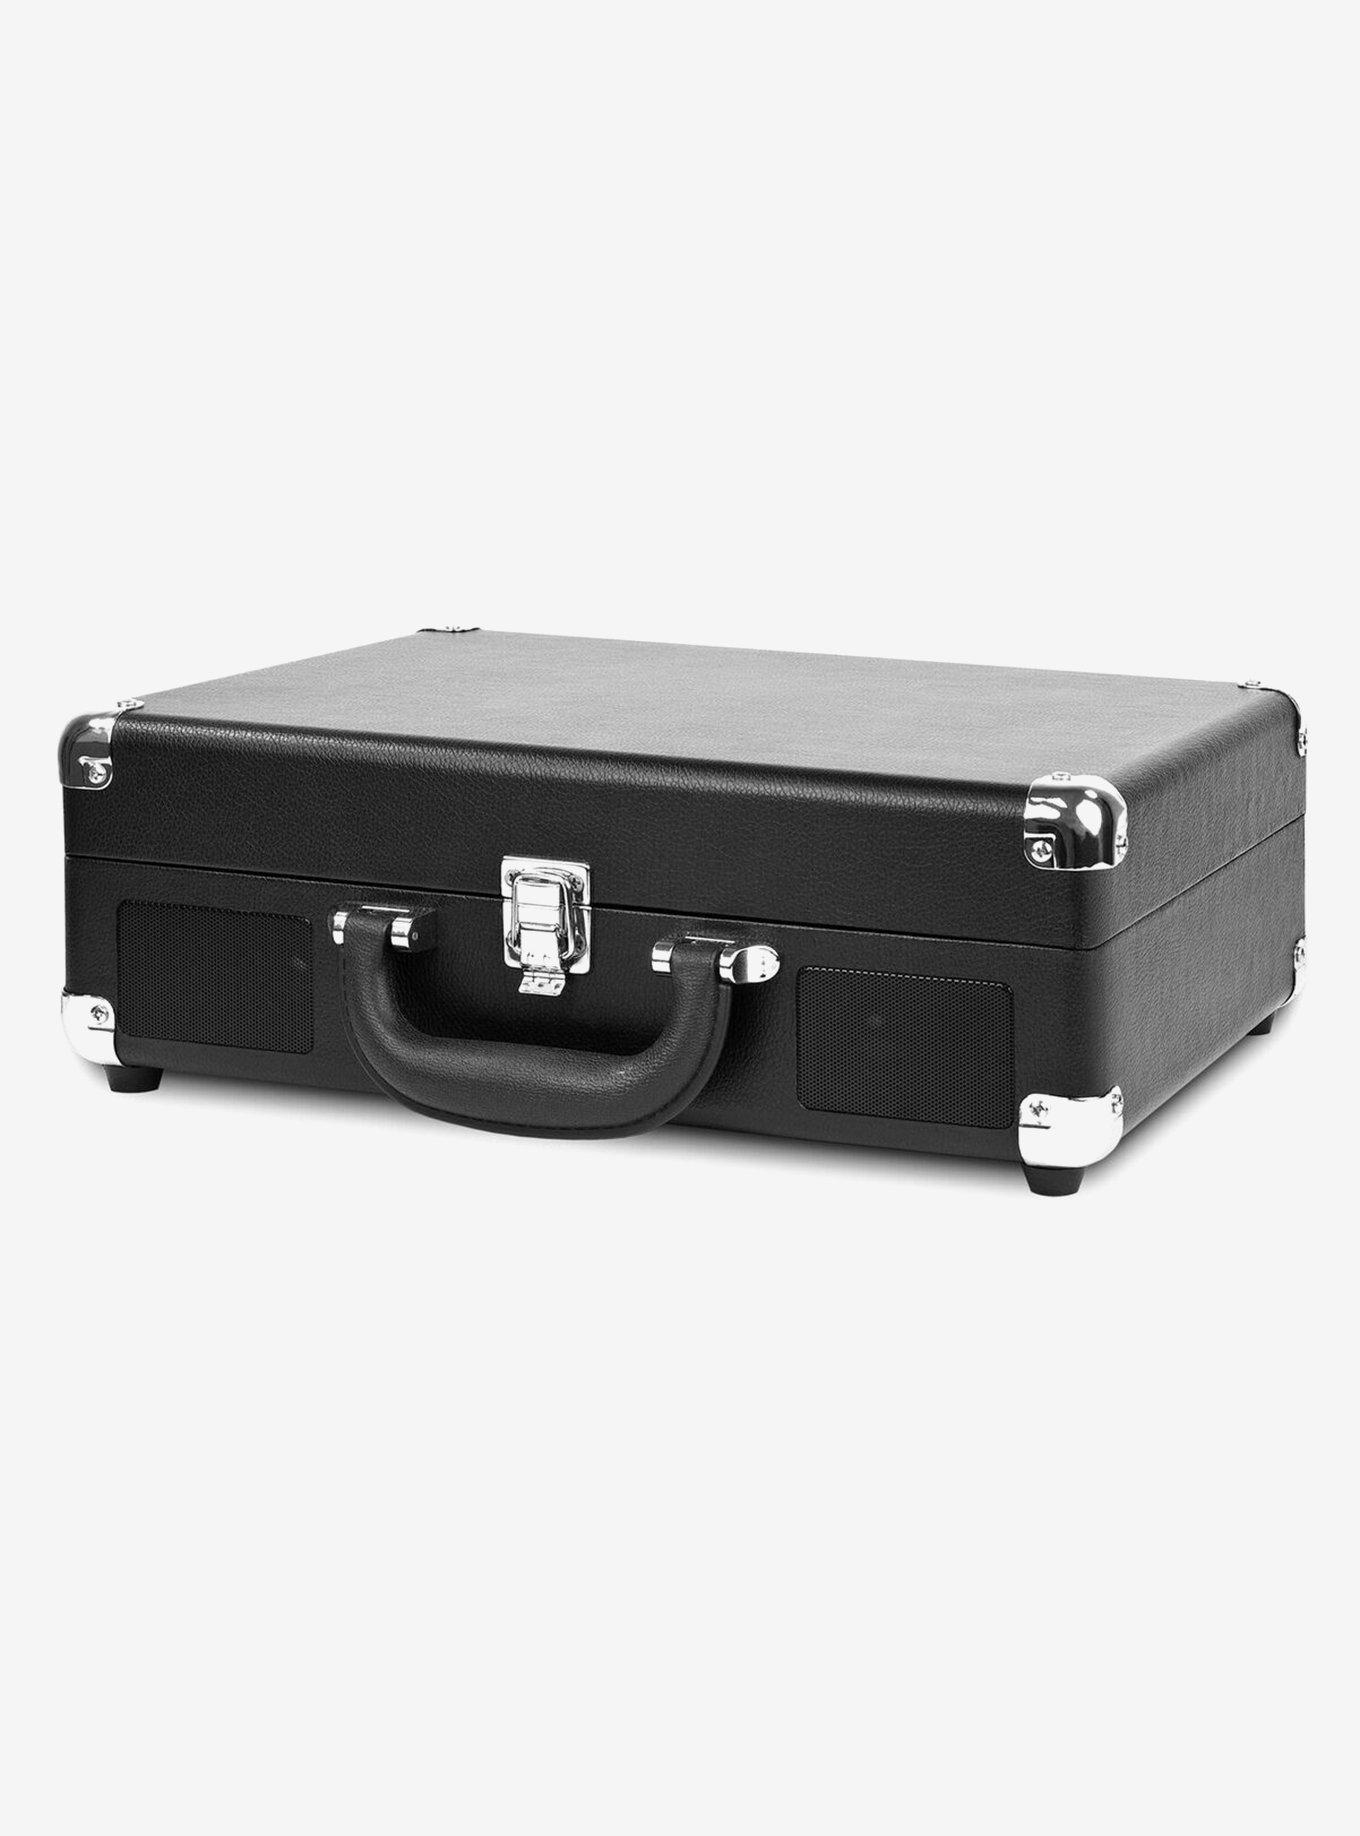 Victrola Bluetooth Suitcase Record Player With 3-Speed Turntable - Black, , alternate